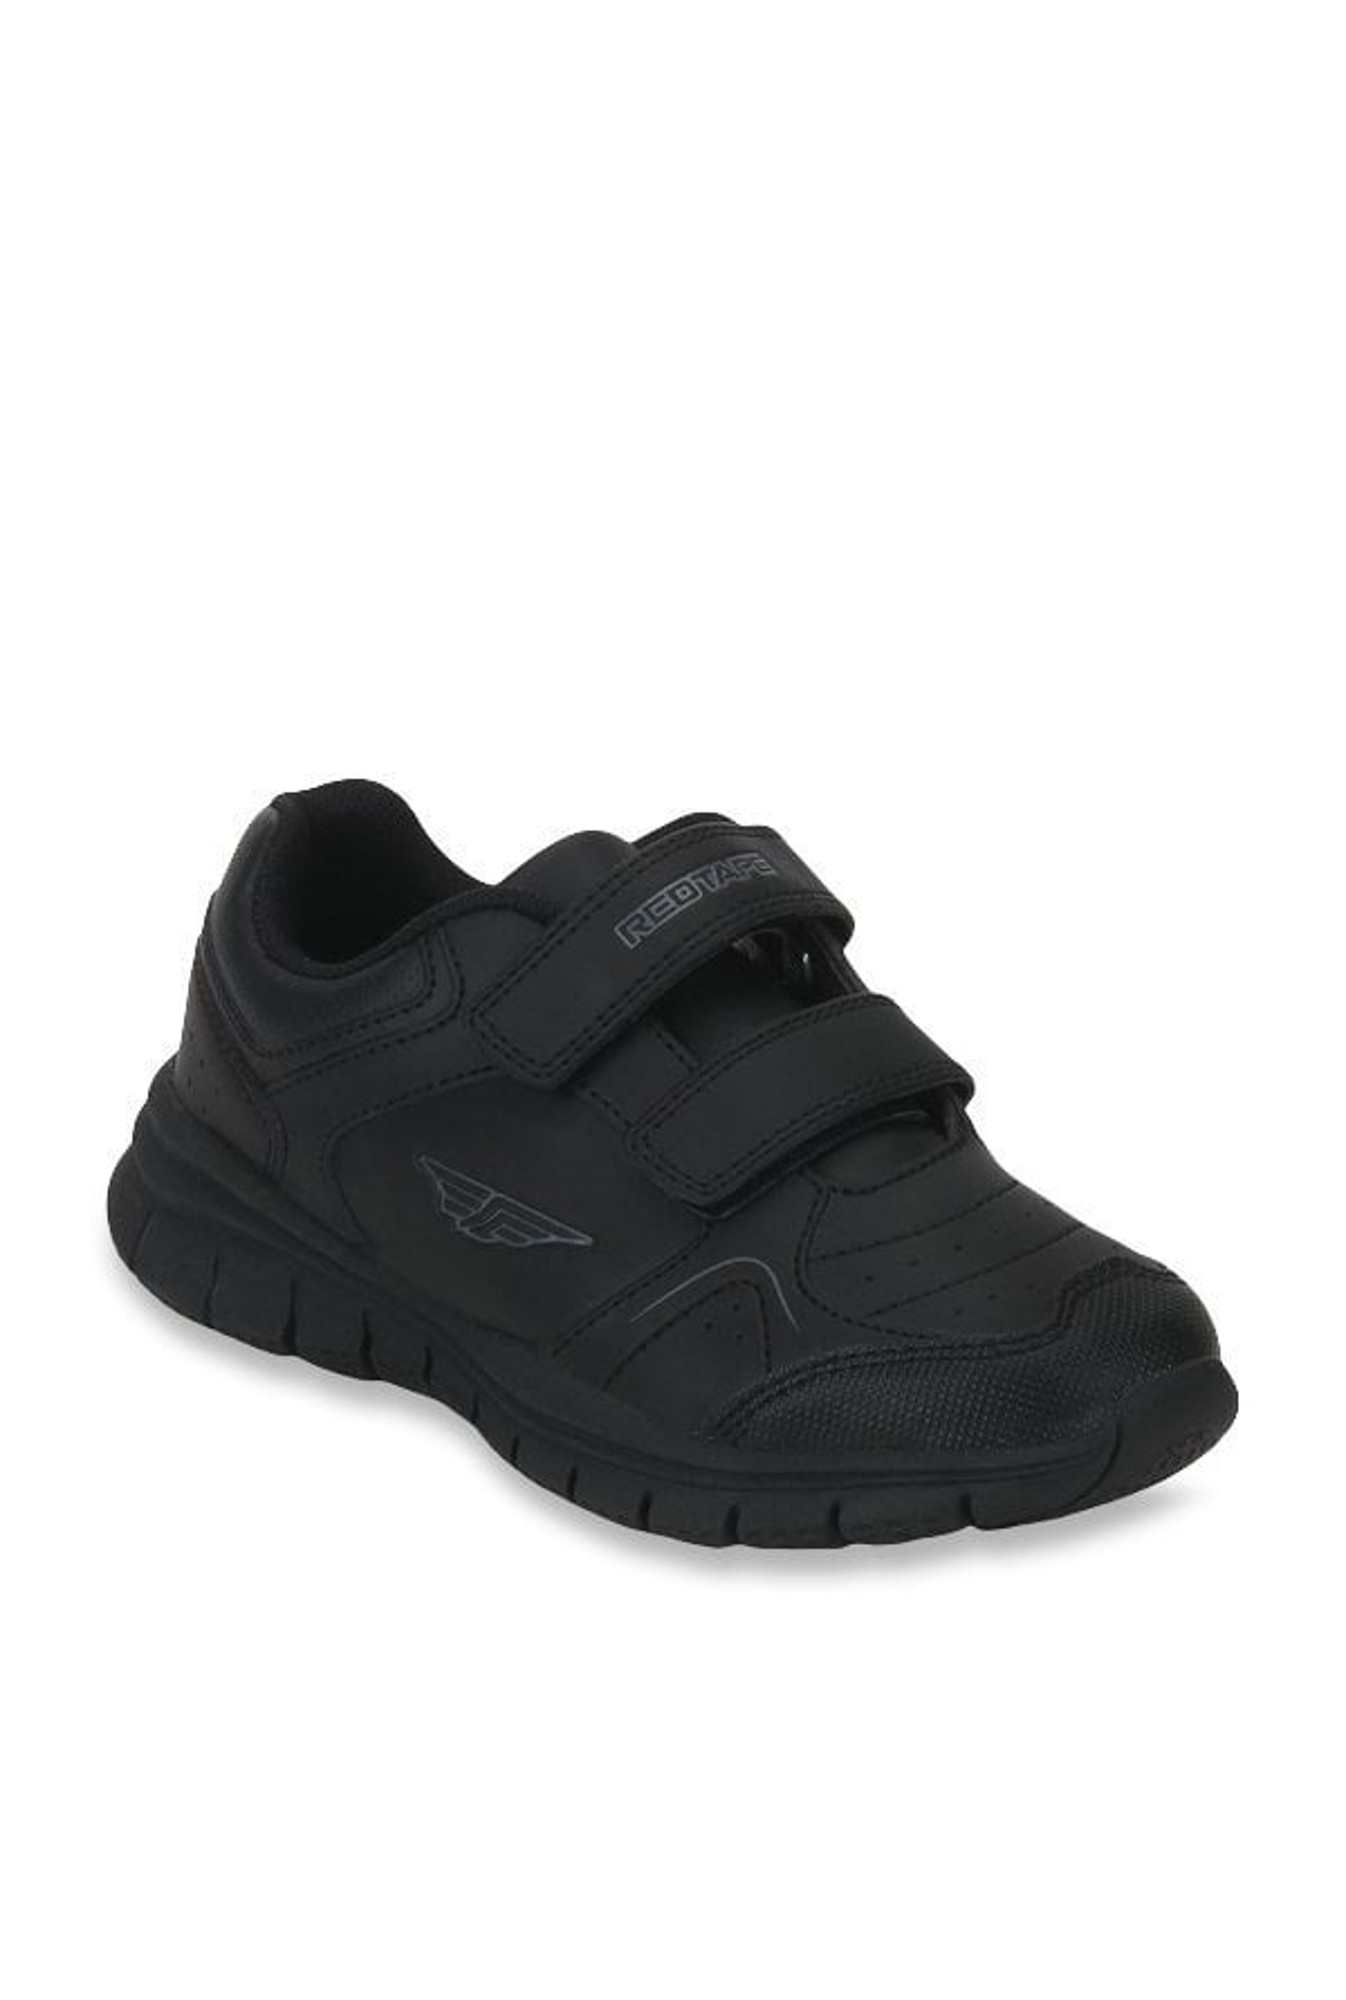 Buy Red Tape Kids Black Velcro Shoes for Boys at Best Price @ Tata CLiQ